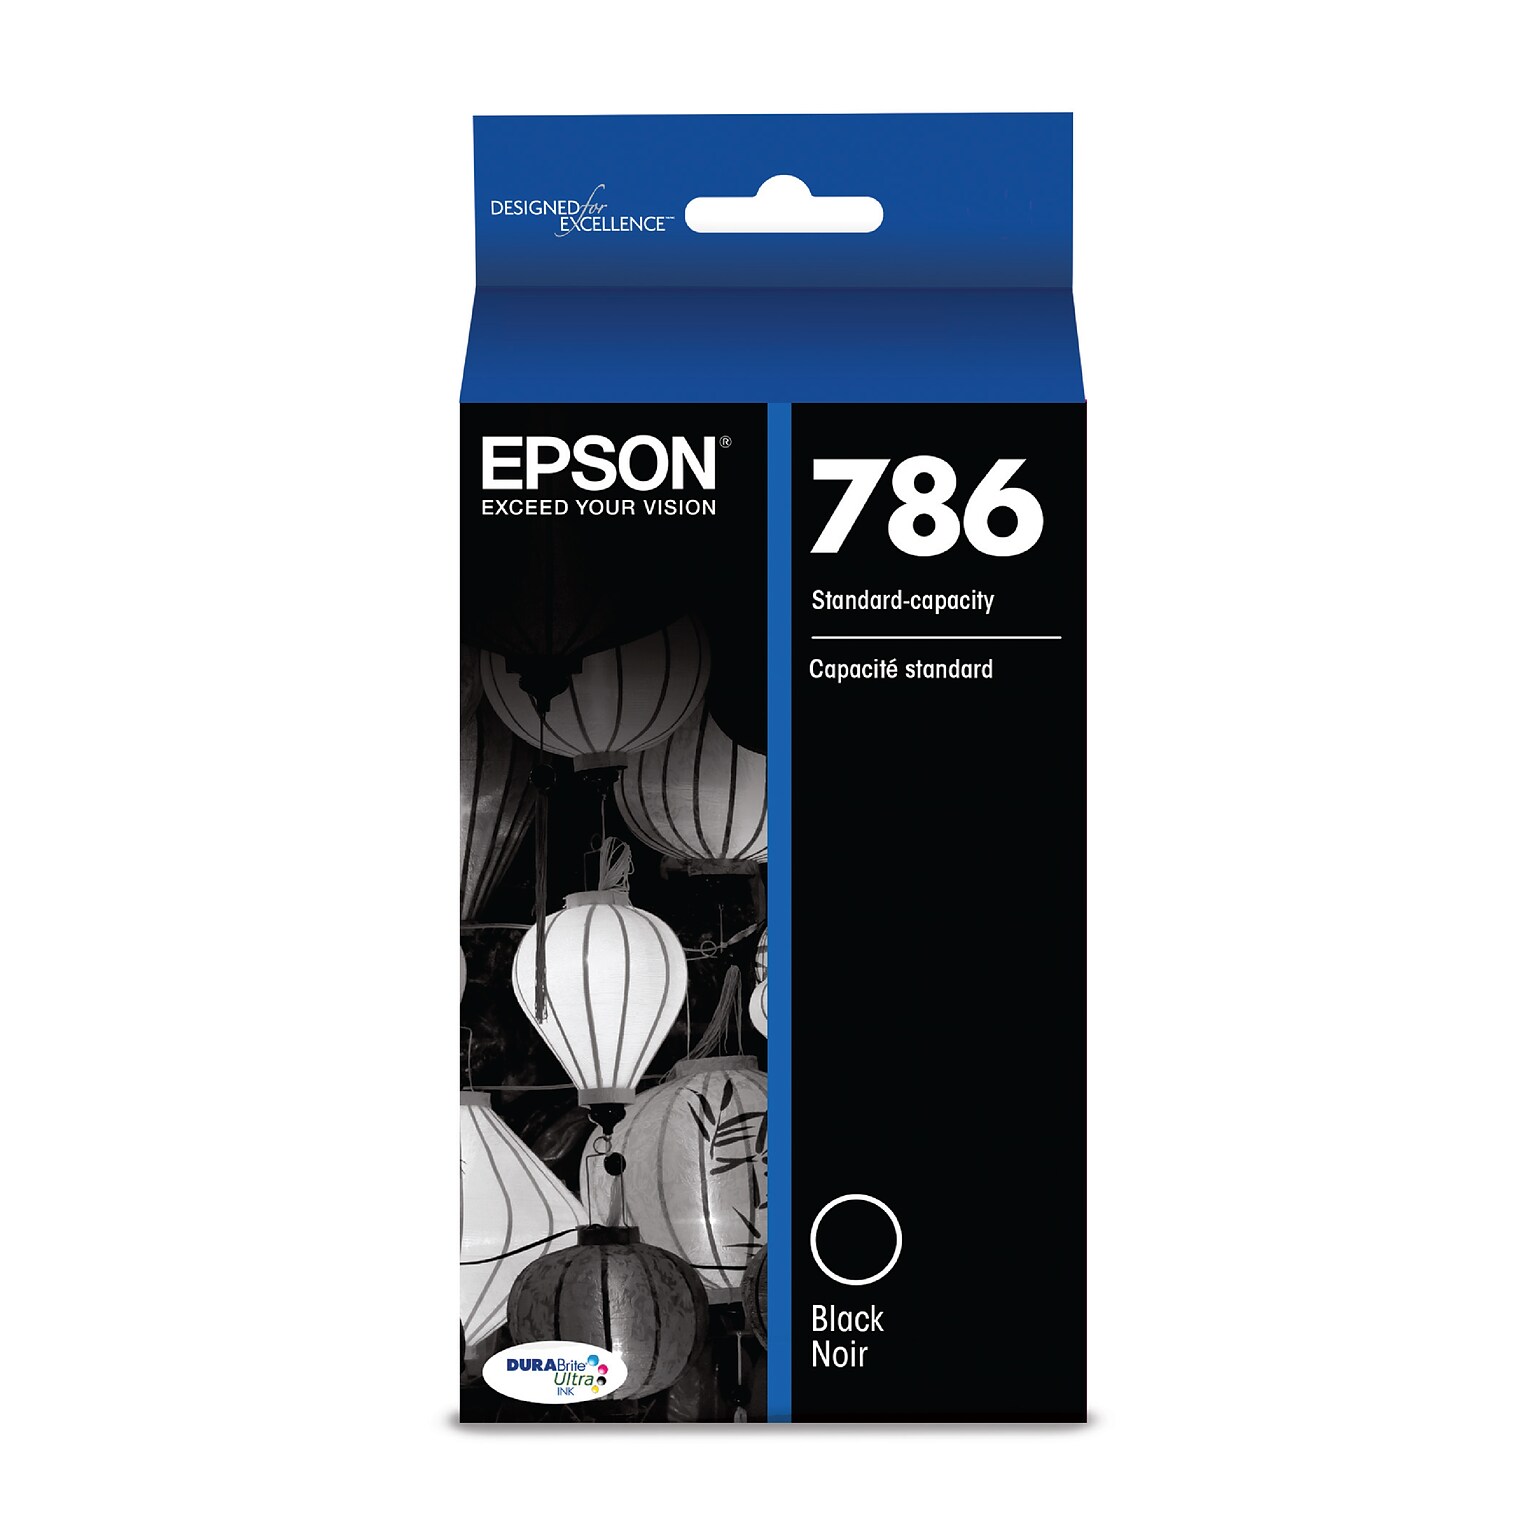 Epson T786 Black Standard Yield Ink Cartridge, Prints Up to 960 Pages (T786120-S)